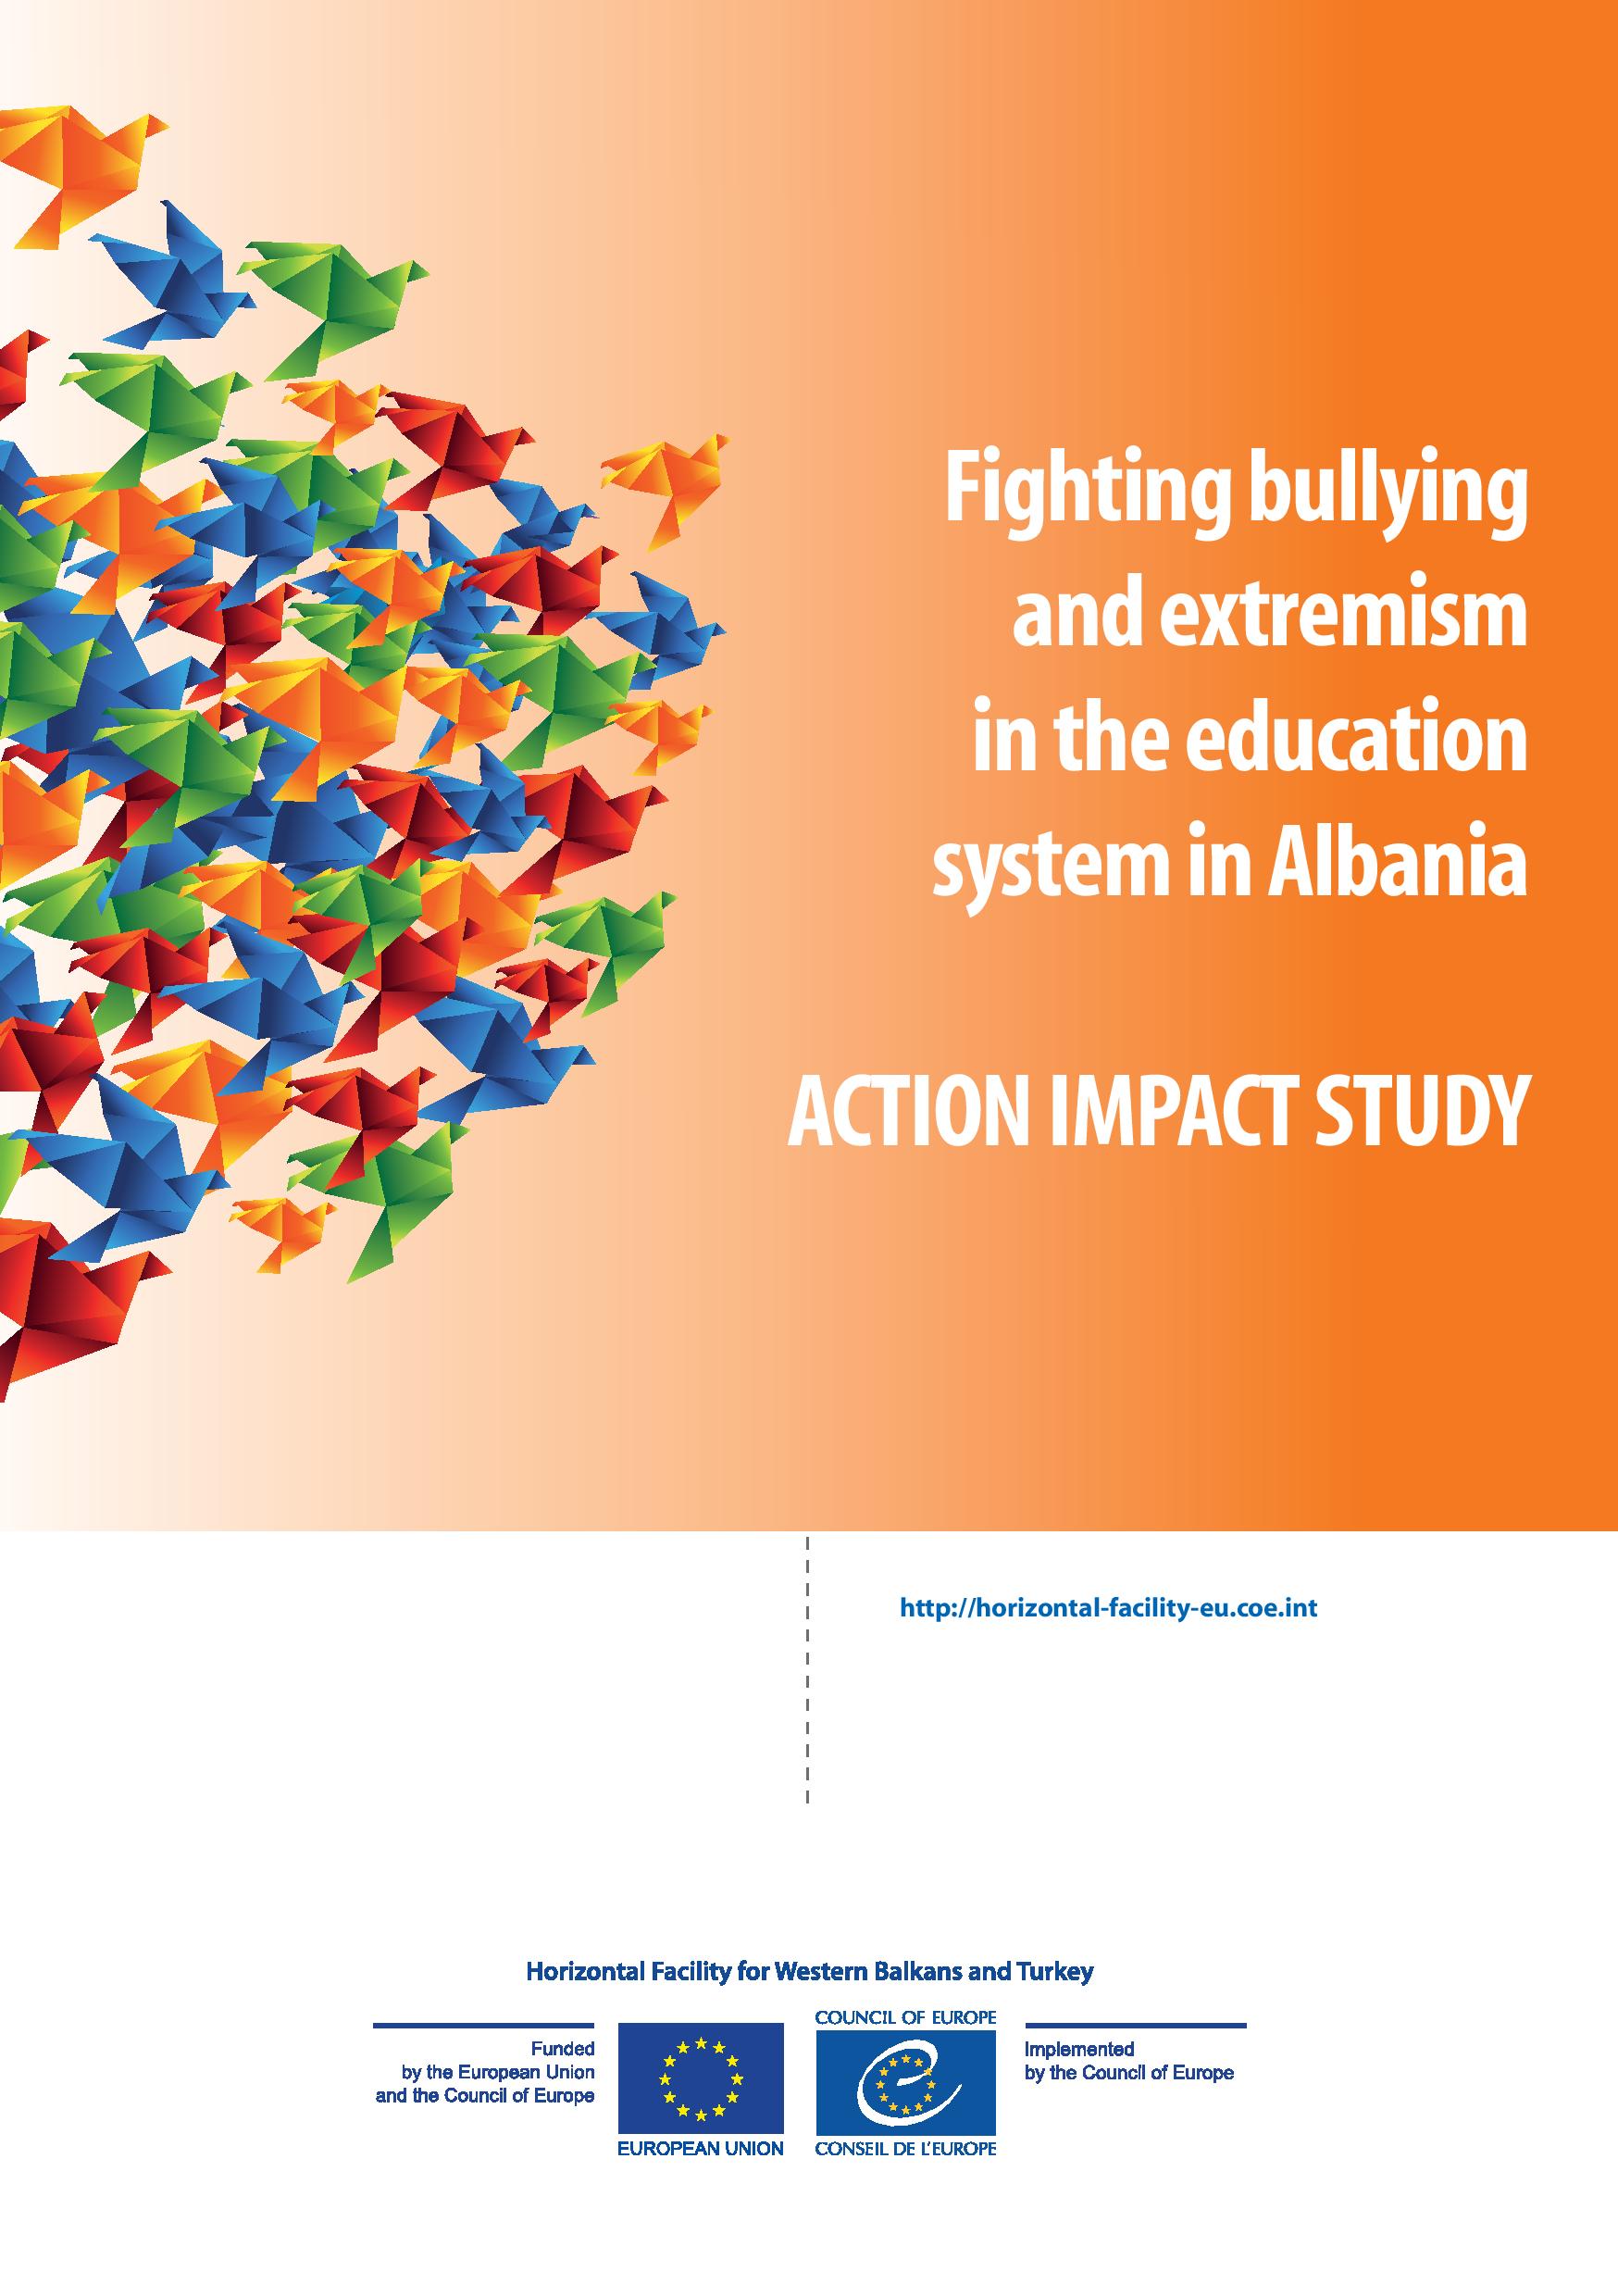 Bullying and Extremism in the Education System - Action Impact Study